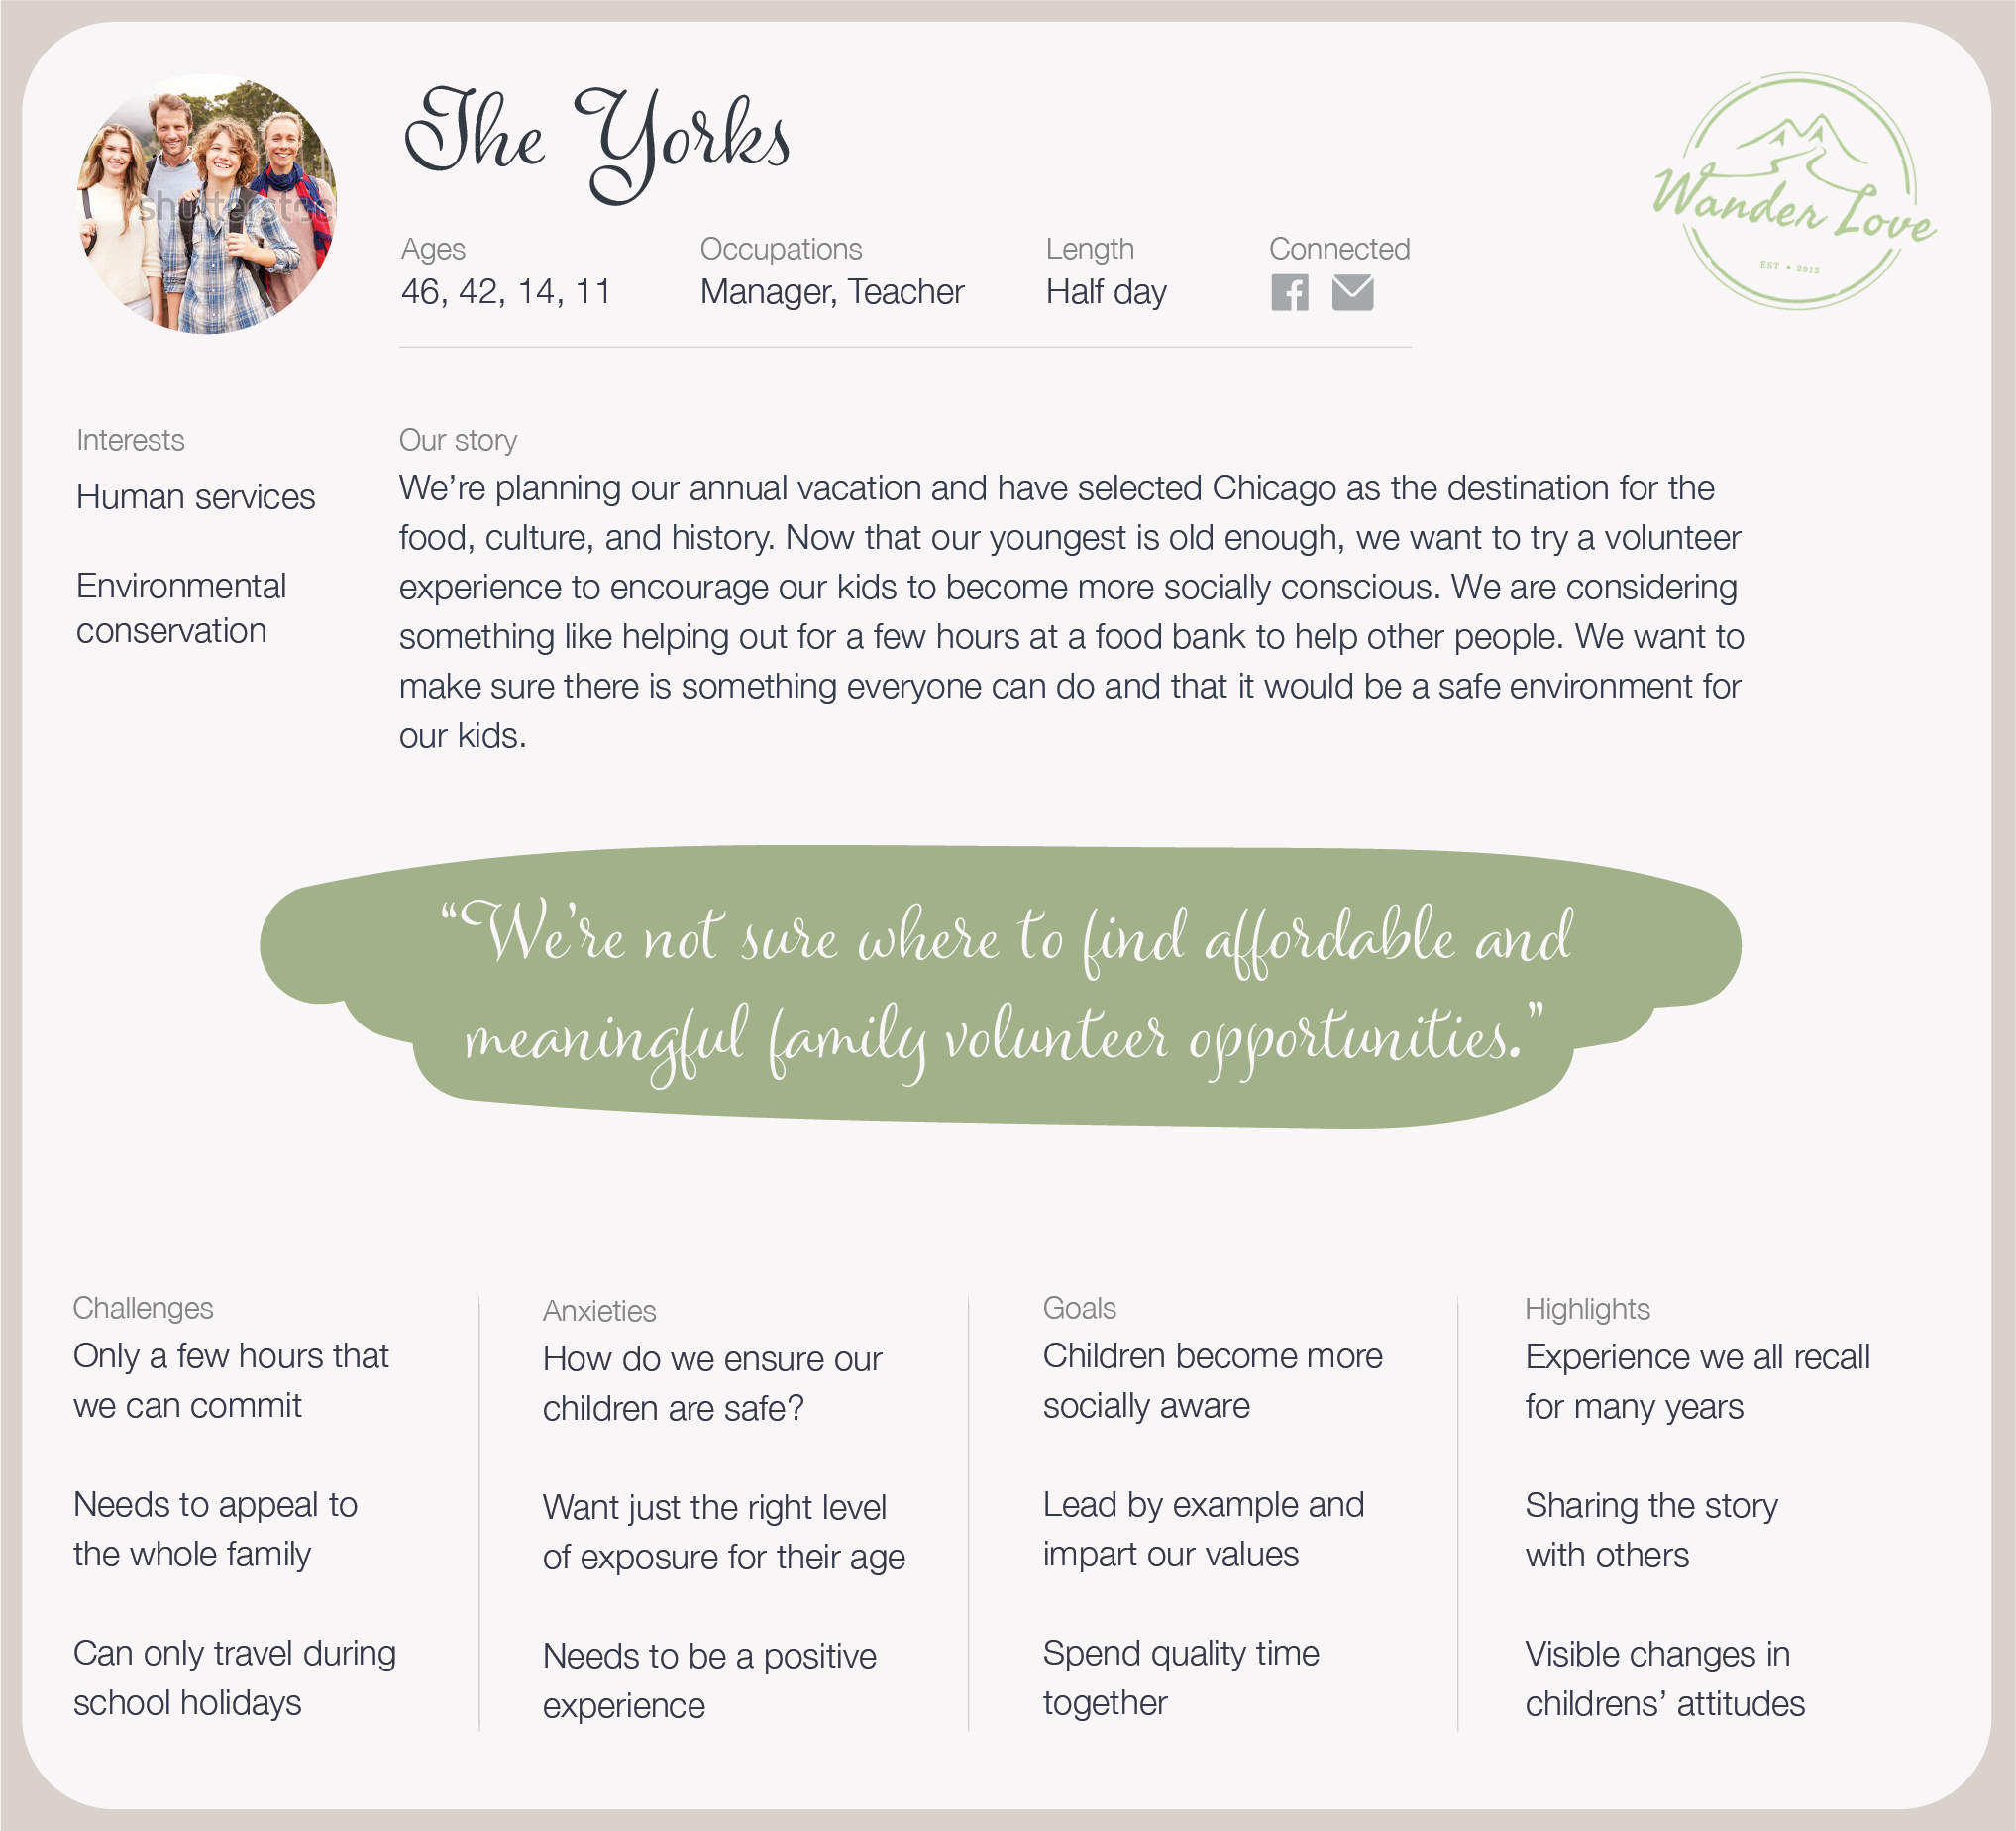 Example of one of the personas created for this project, featuring a family of travelers